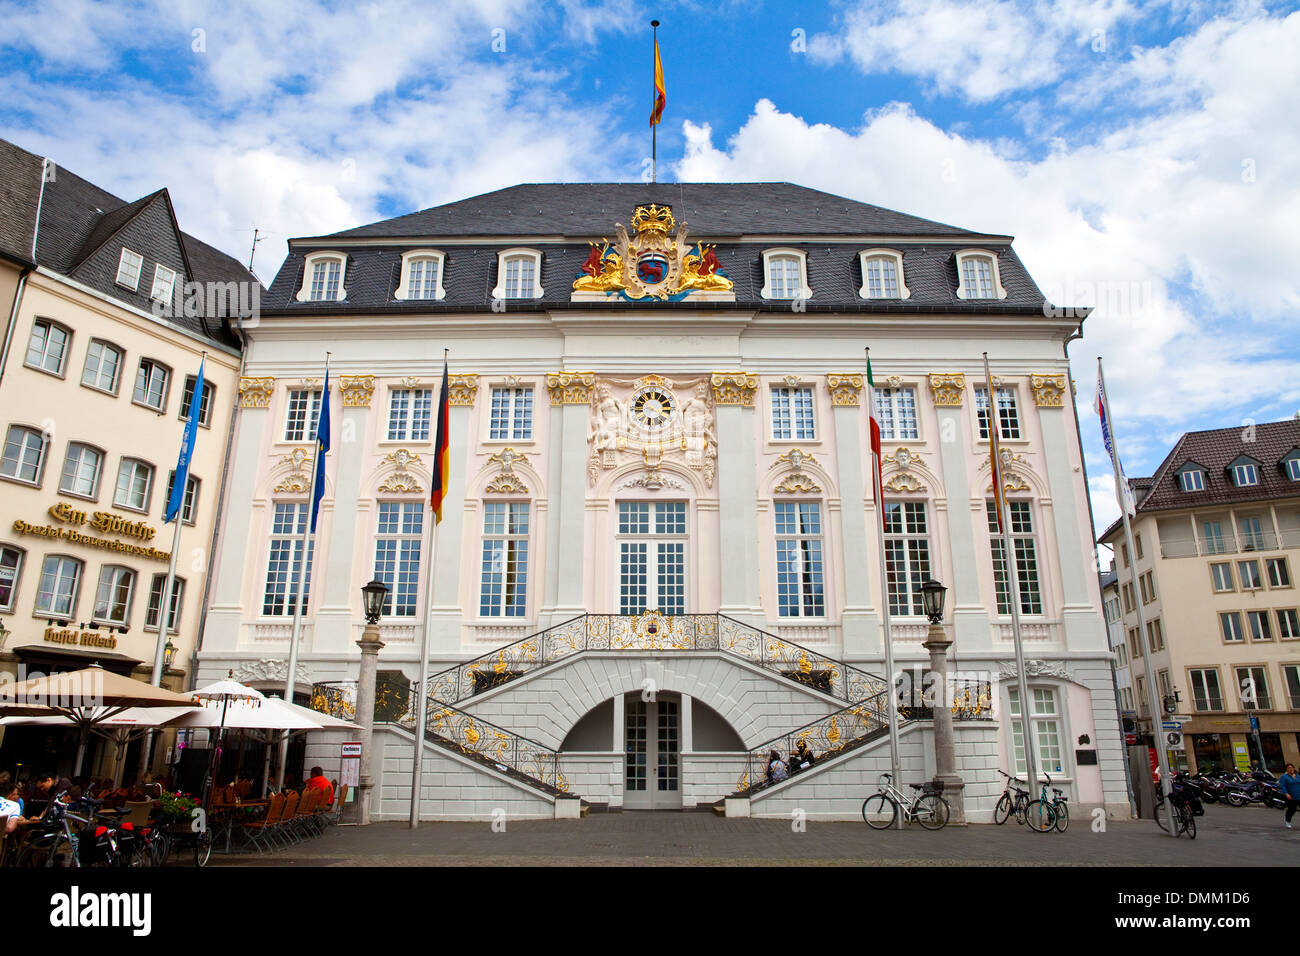 The historic Town Hall (Rathaus) of Bonn in Germany. View from the Market Square. Stock Photo